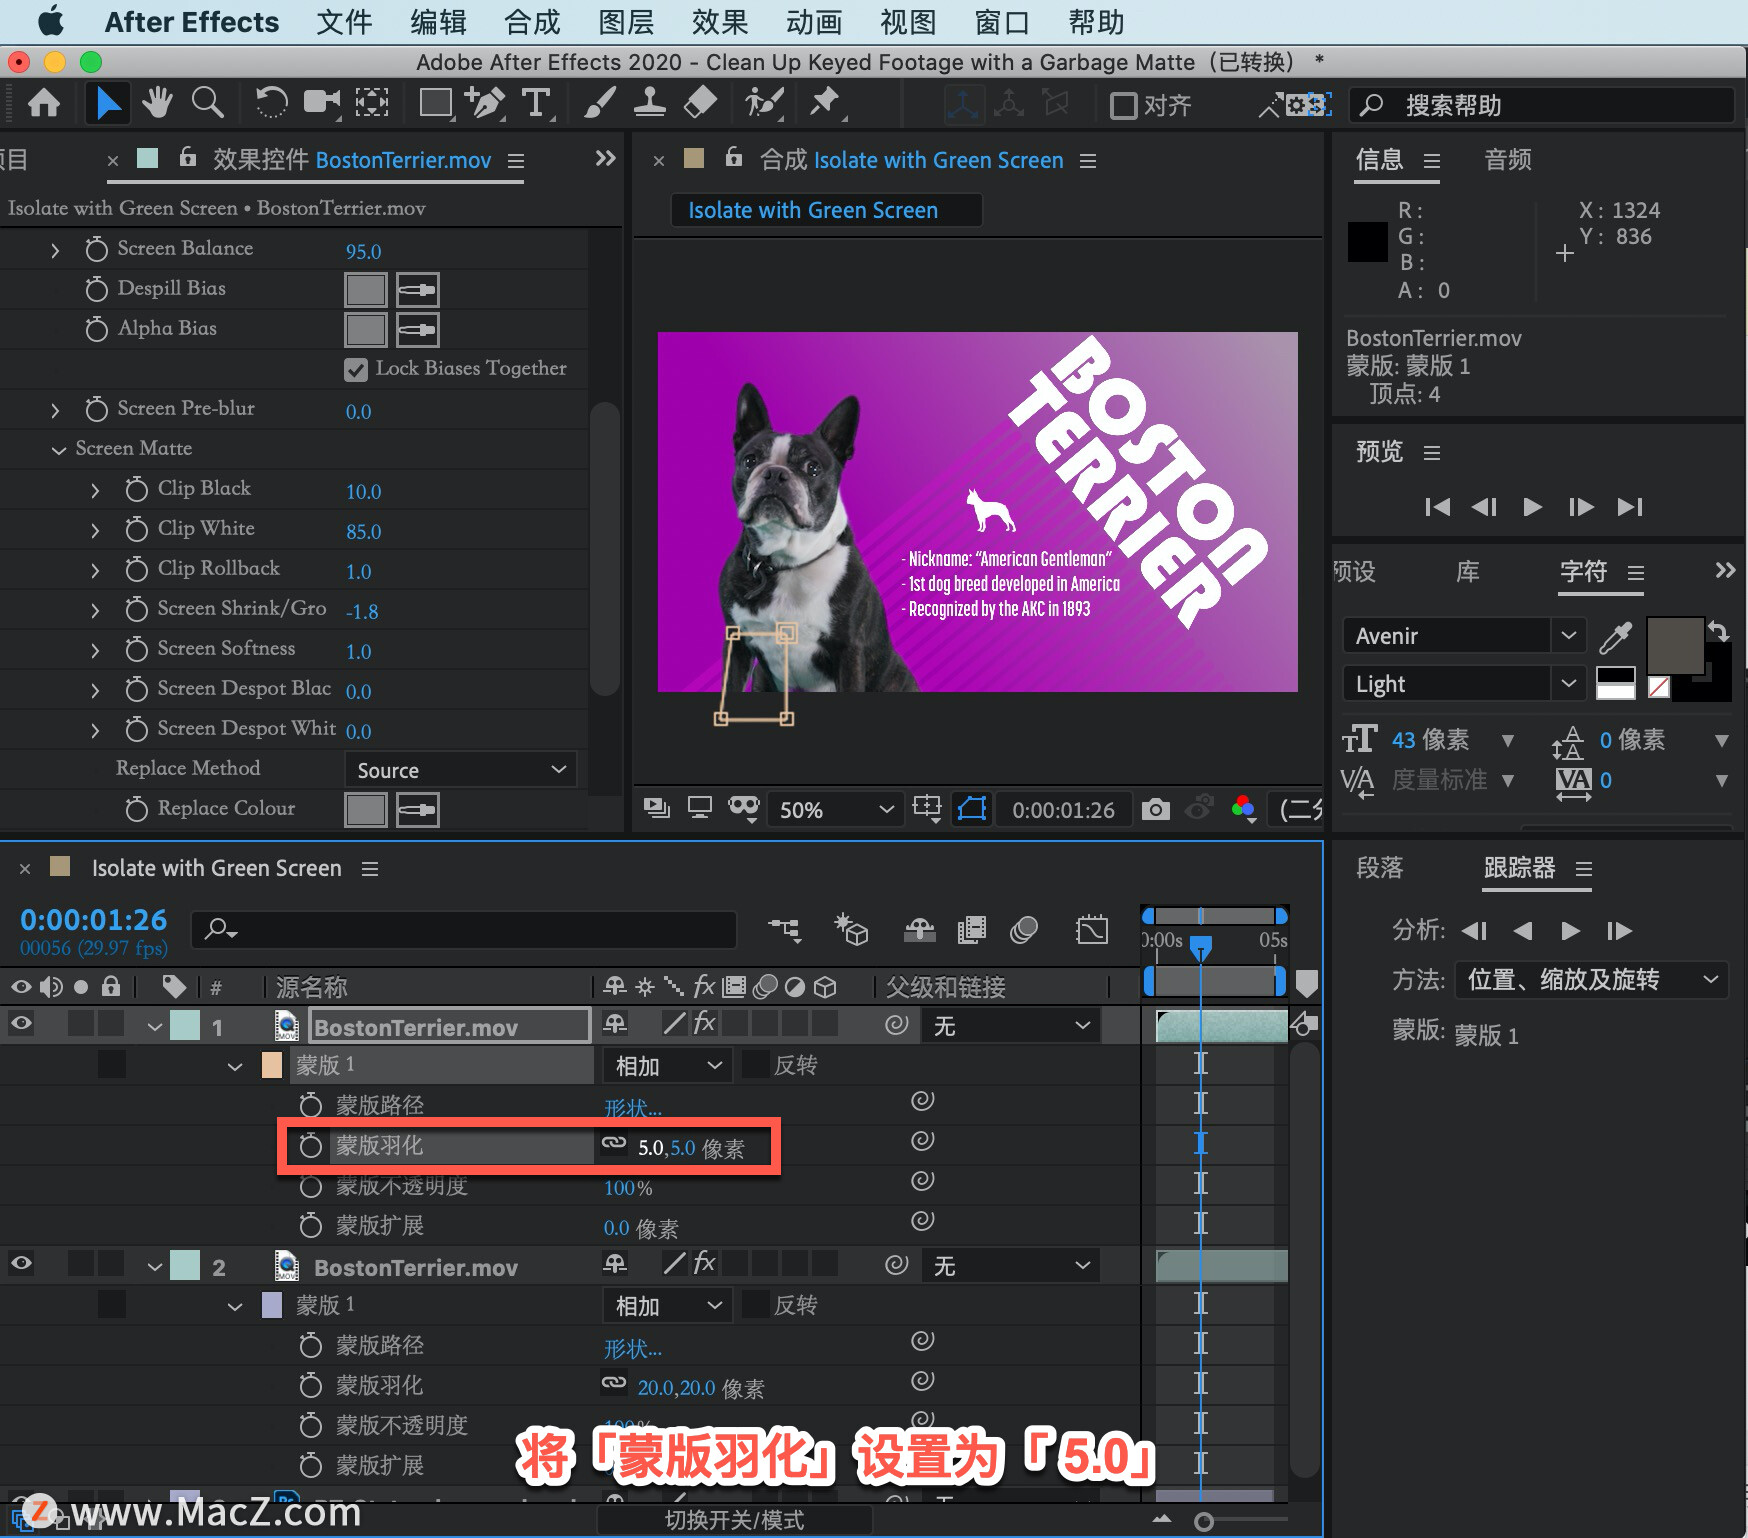 After Effects 教程「38」，如何在 After Effects 中创建复制图层清理素材？